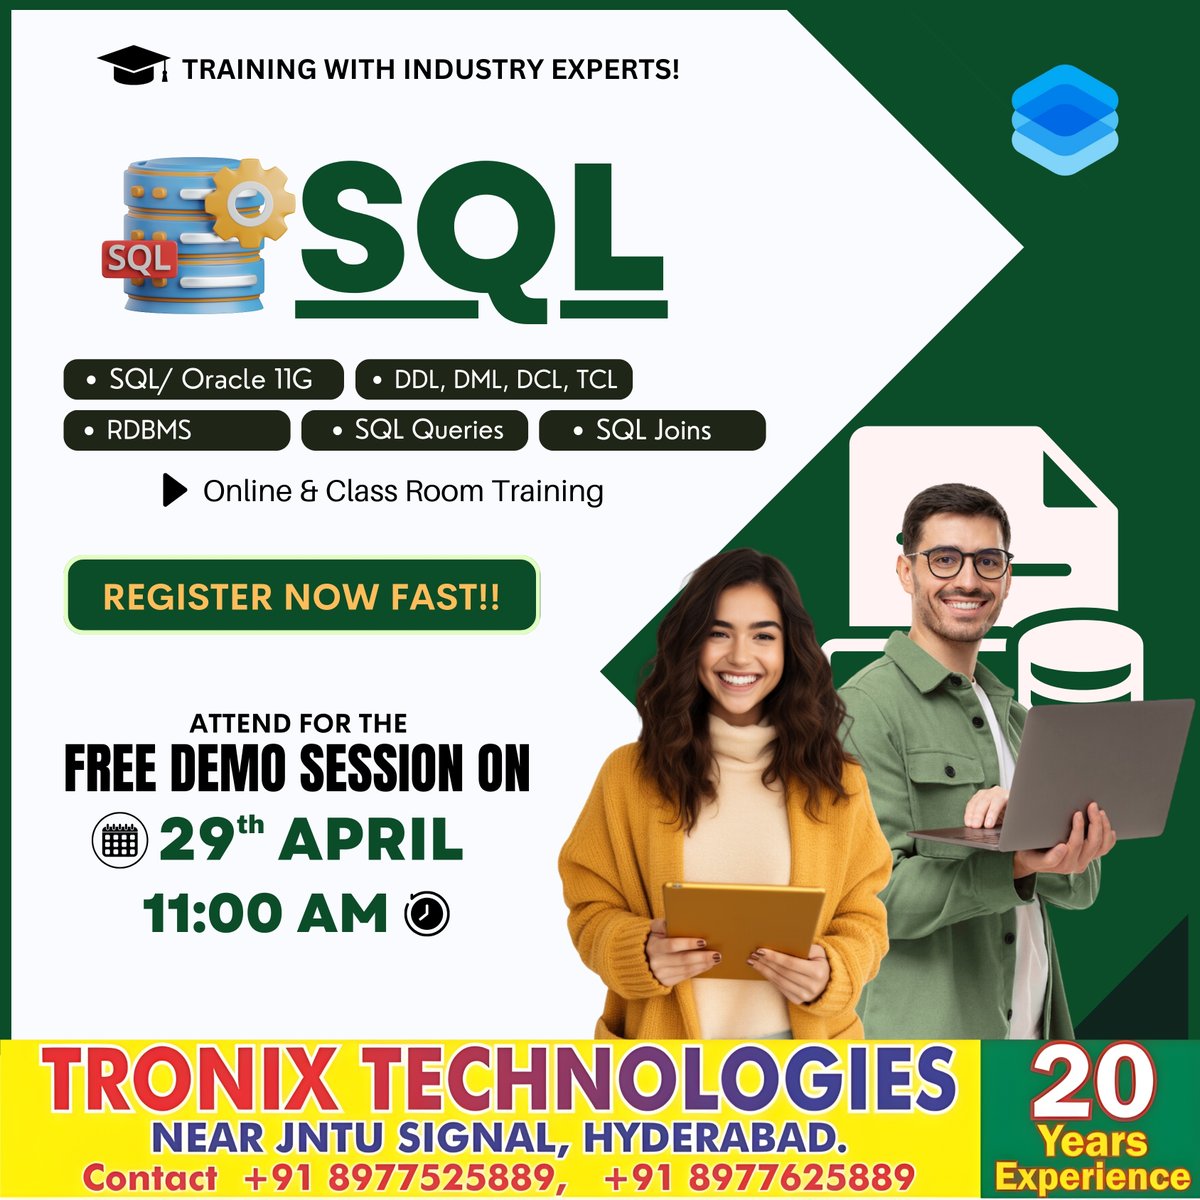 Don't Miss Out this Opportunity!
#SQL #sqltraining #sqldba #sqlonlinetraining #sqlonlinecoaching #tronixtechnologies #softwaretraininginstitute #education #learining #bestsoftwaretraininginstitute #onlinelearning #onlinelearningcourses